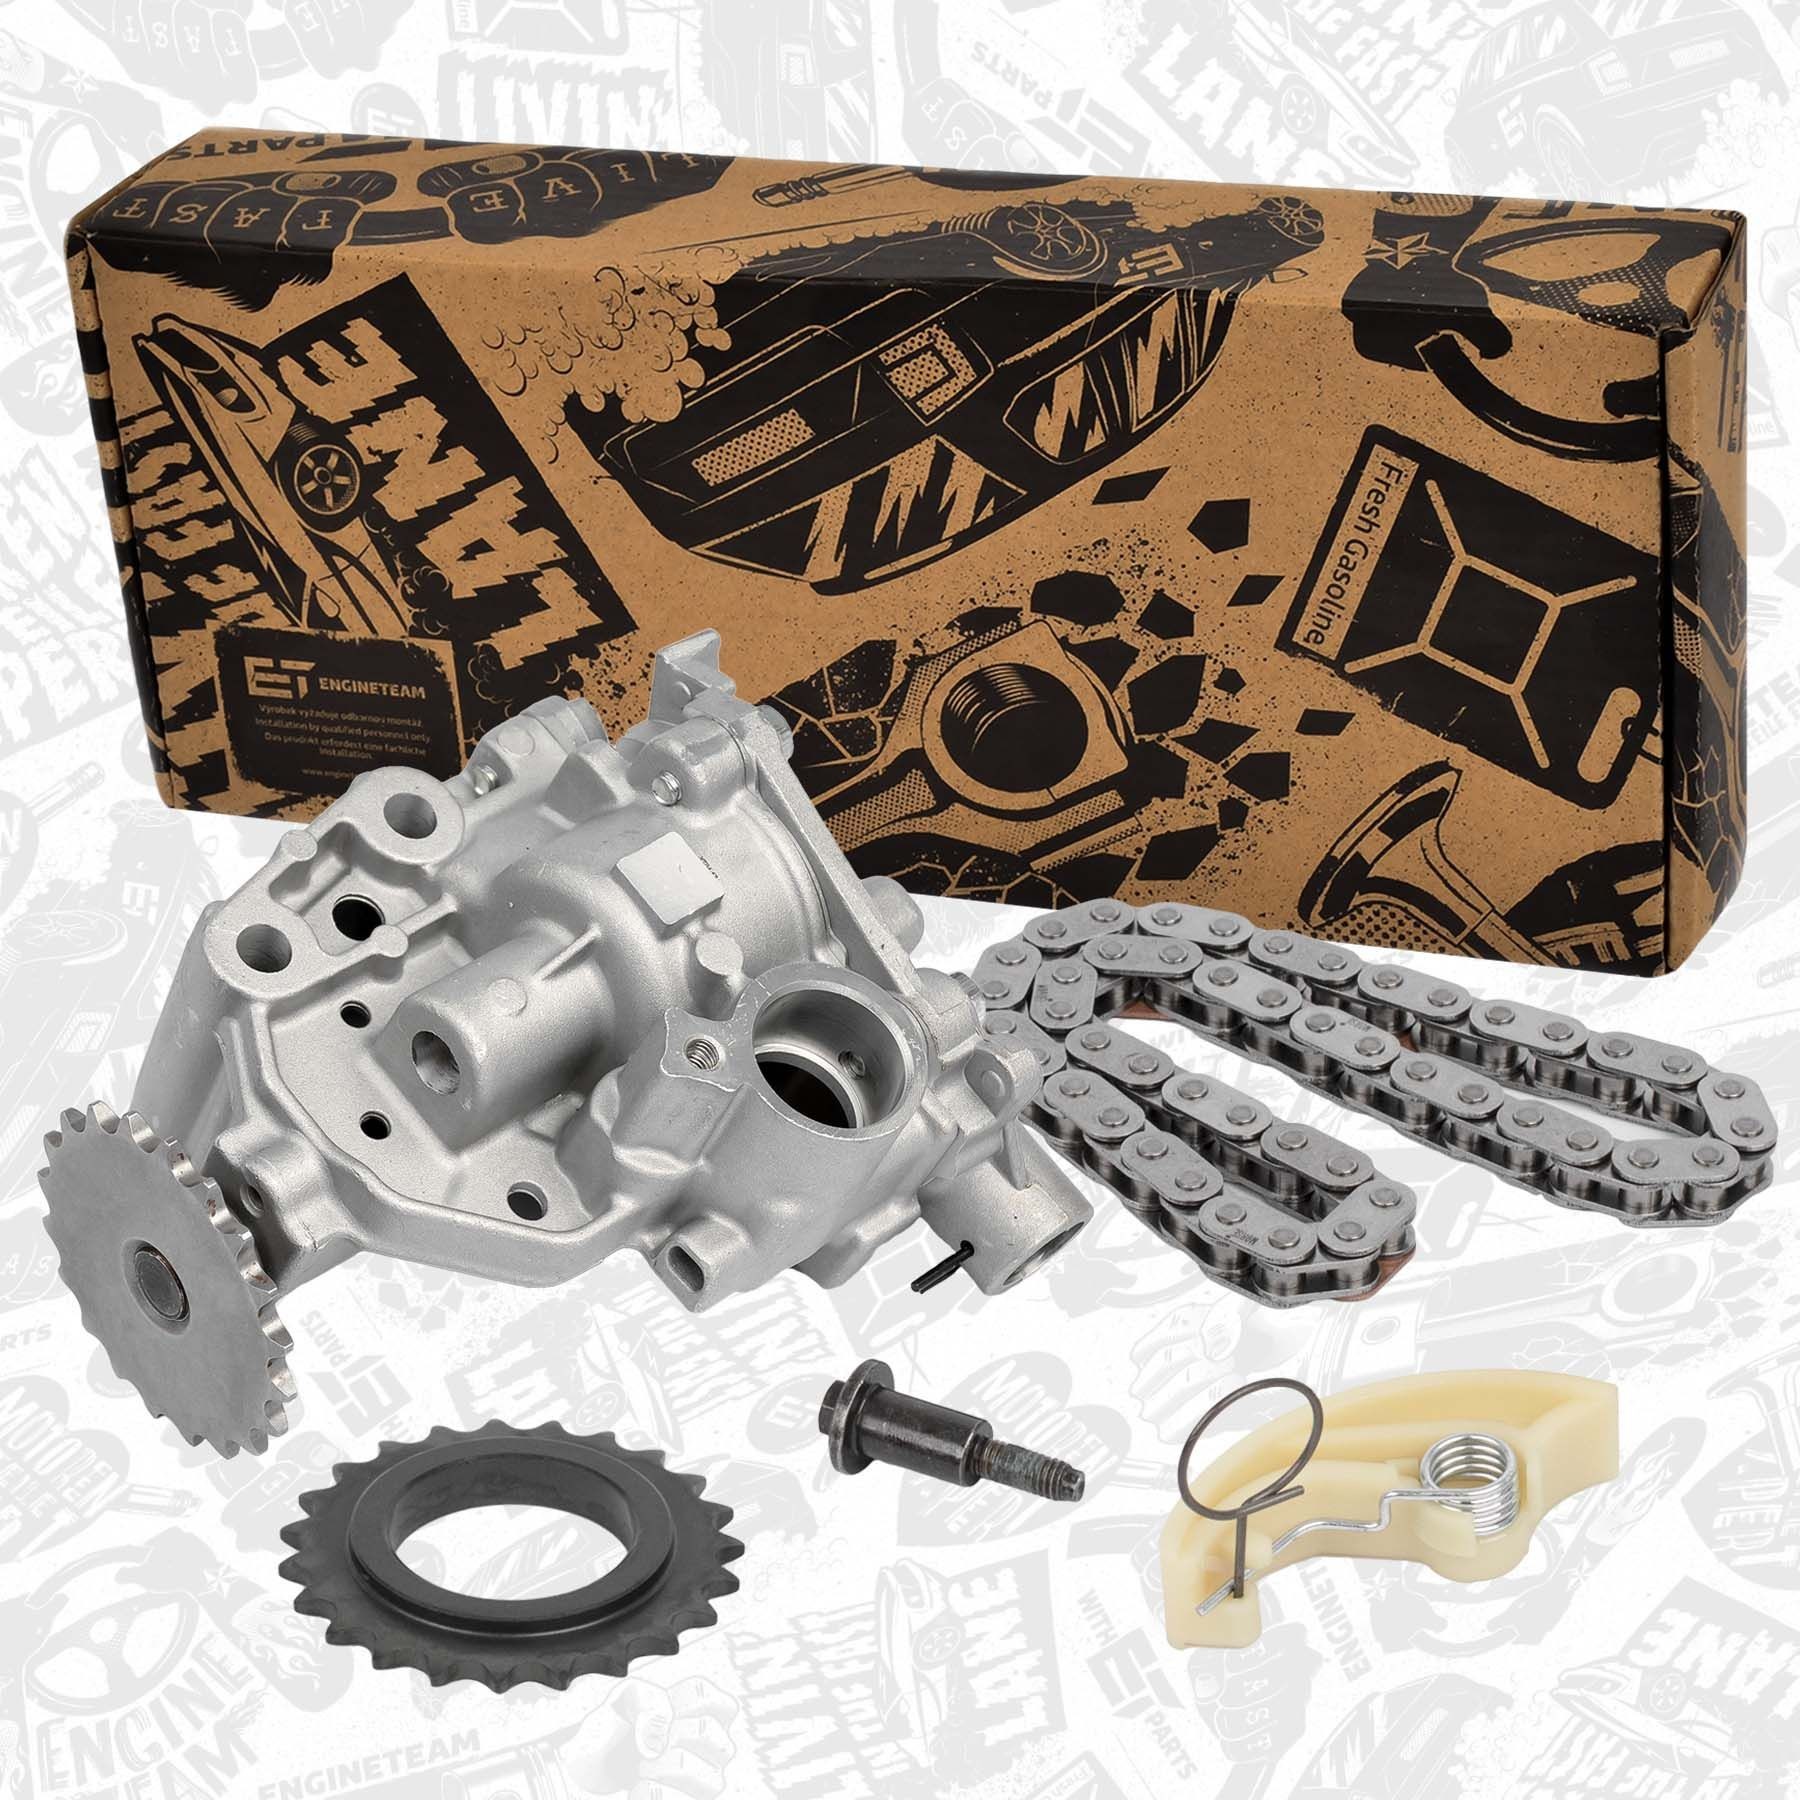 ET ENGINETEAM RS0105VR1 Timing chain kit 15 0A 067 27R